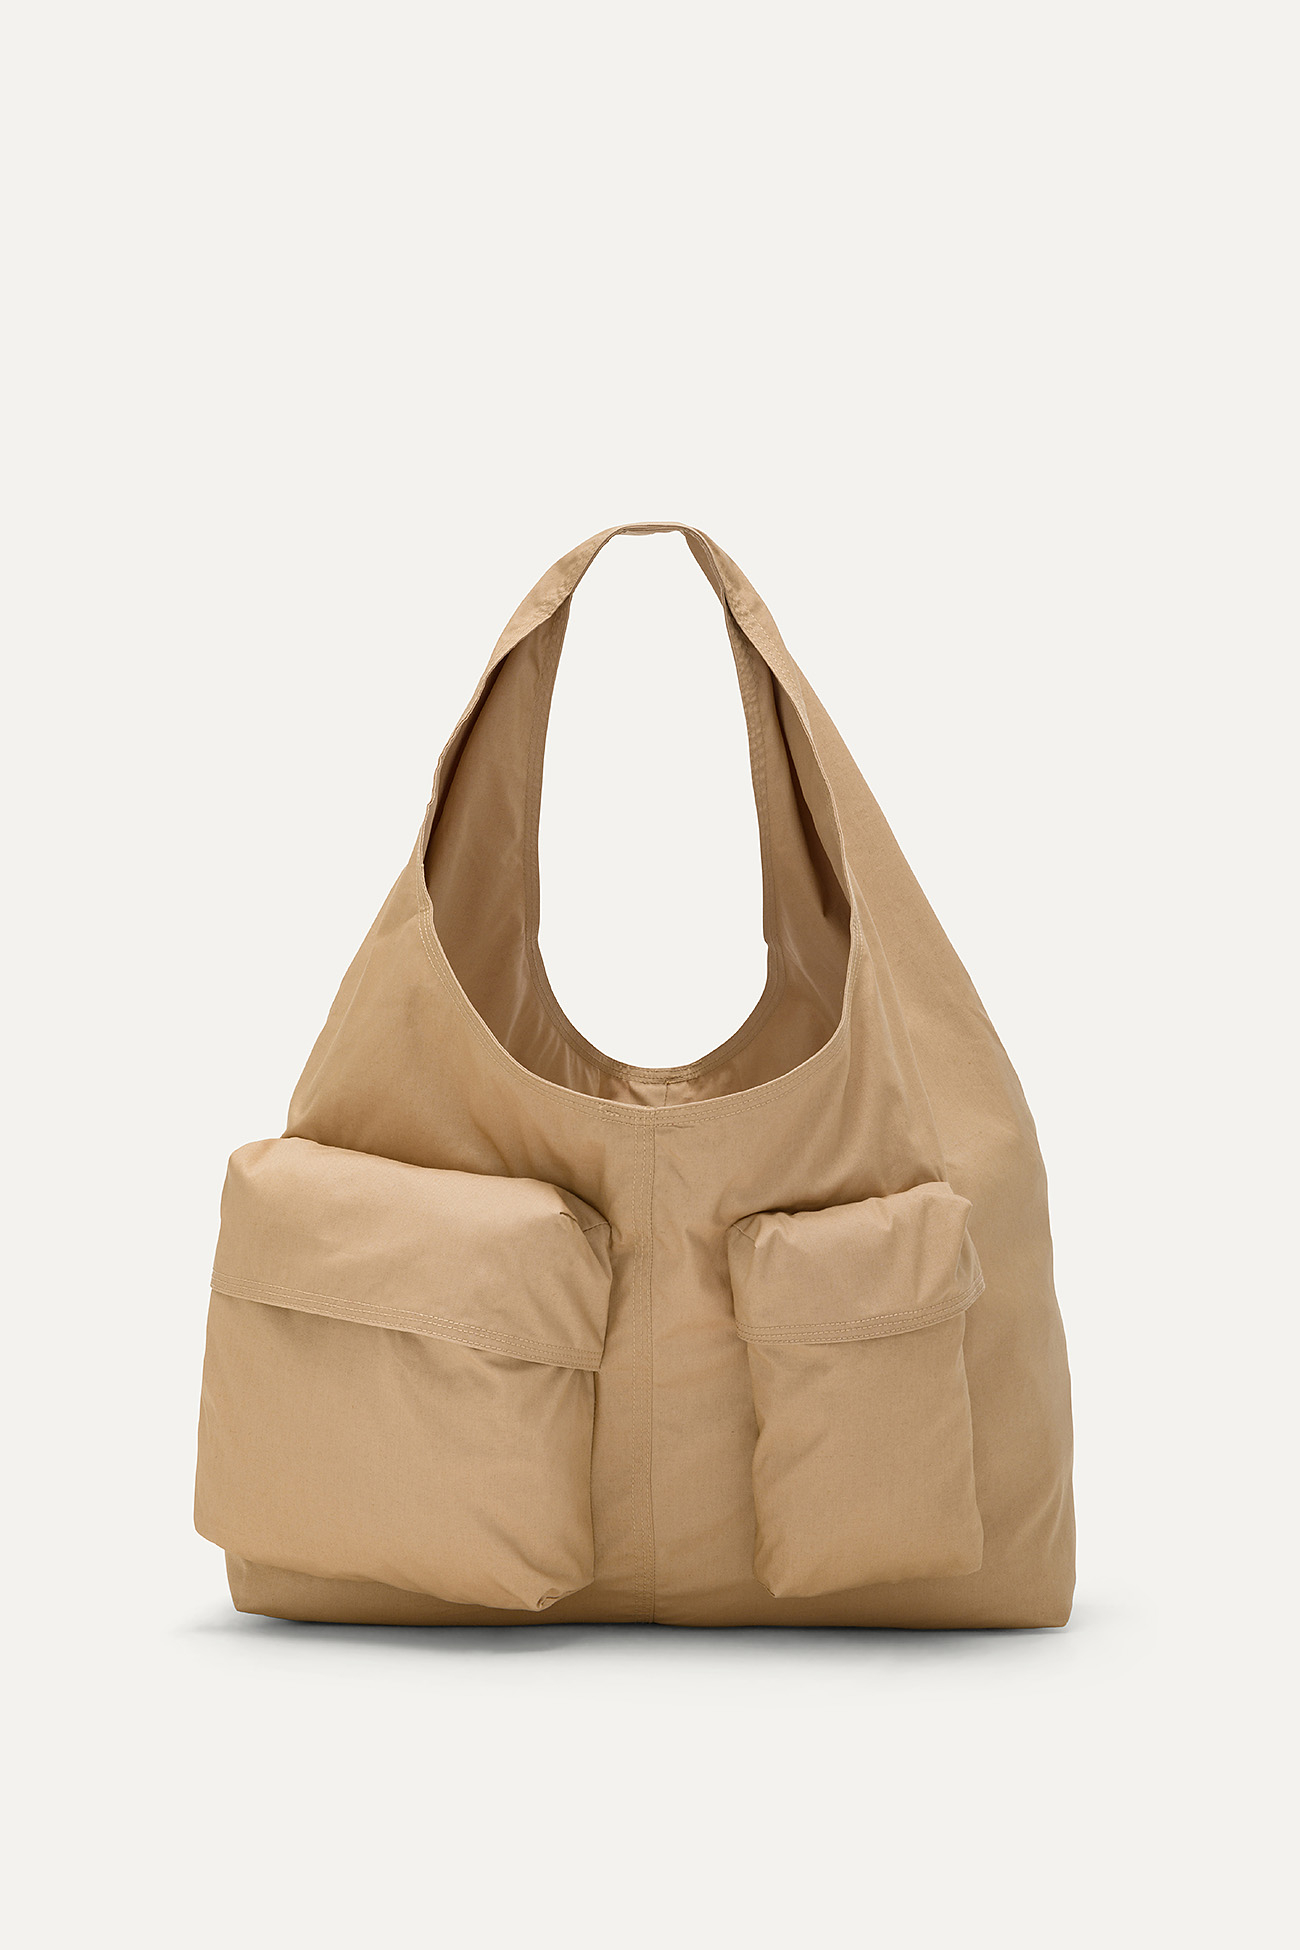 BAG WITH POCKETS IN COTTON GABARDINE 3085 - NATURAL - OOF WEAR